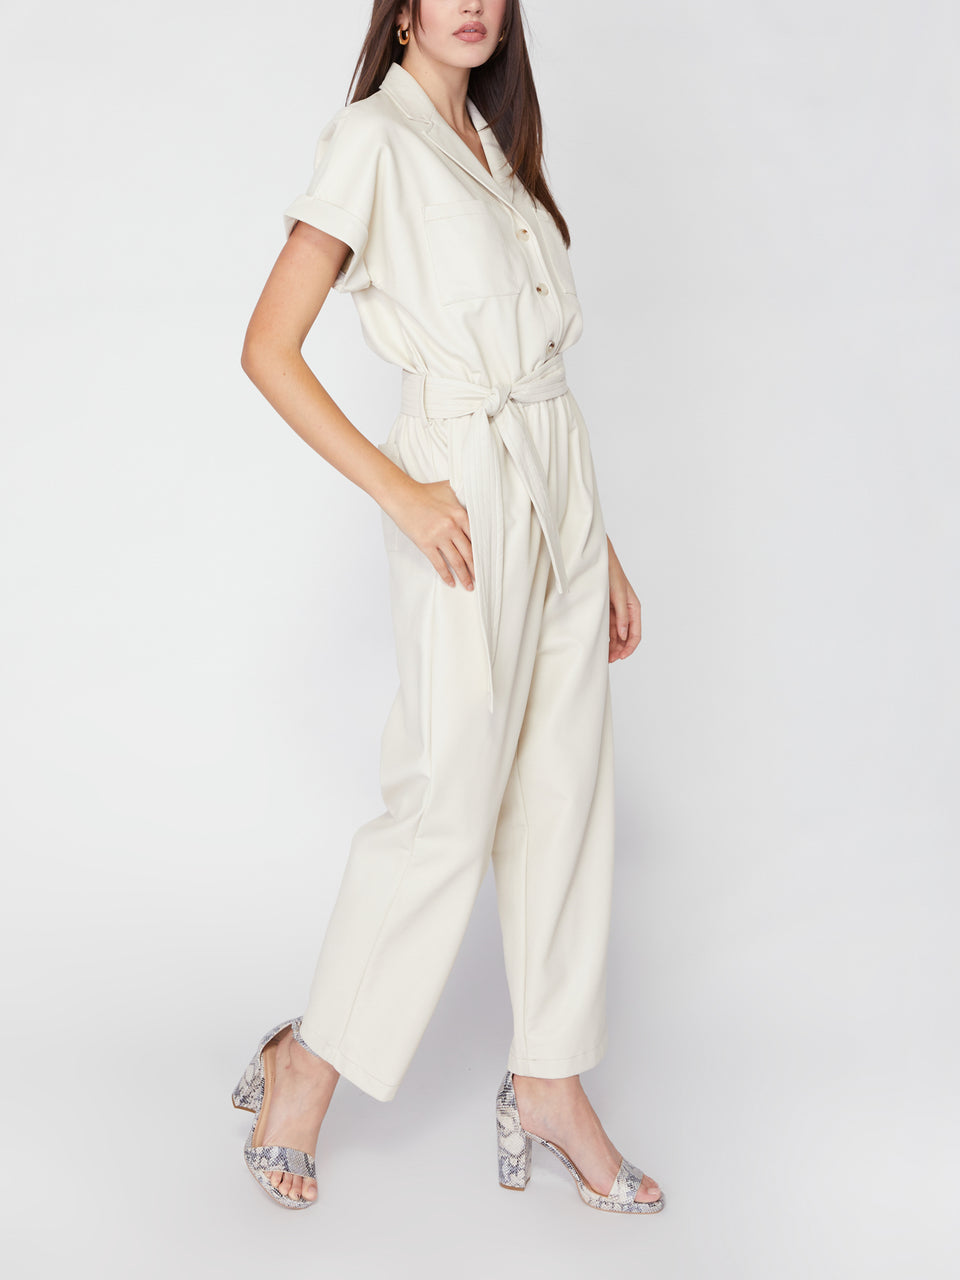 lost_and_wander_champagne_stories_jumpsuit_cream